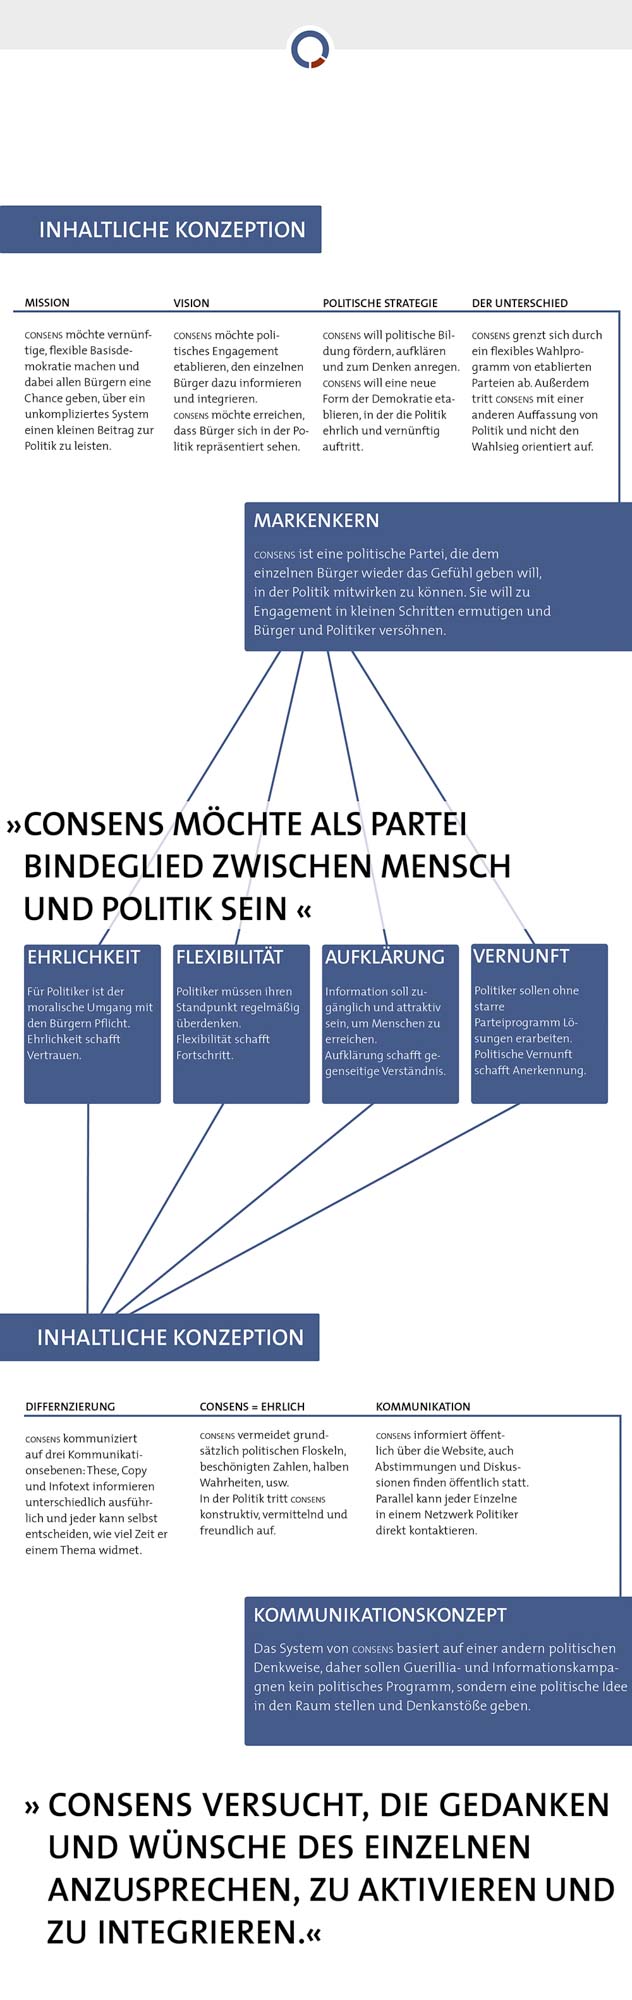 graphic showing the conceptual system behind the consens party